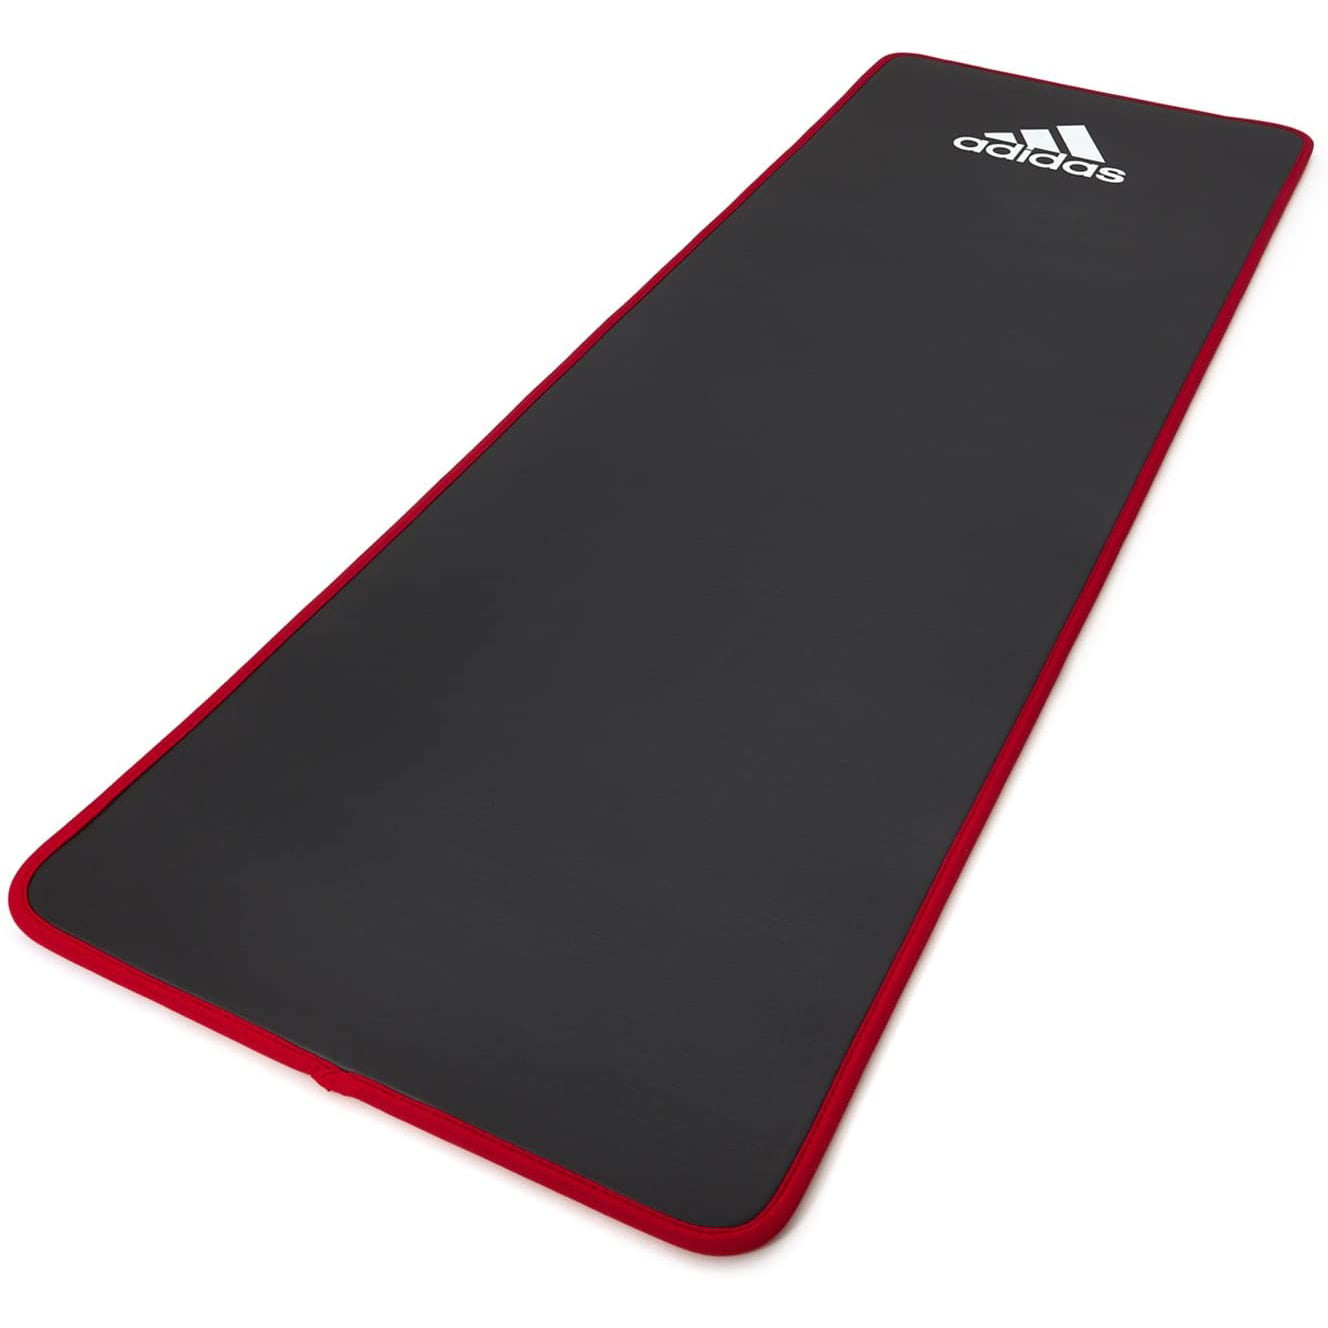 Training Mat 72 24 Cushioned Exercise Yoga with Carry Strap, Black - Walmart.com